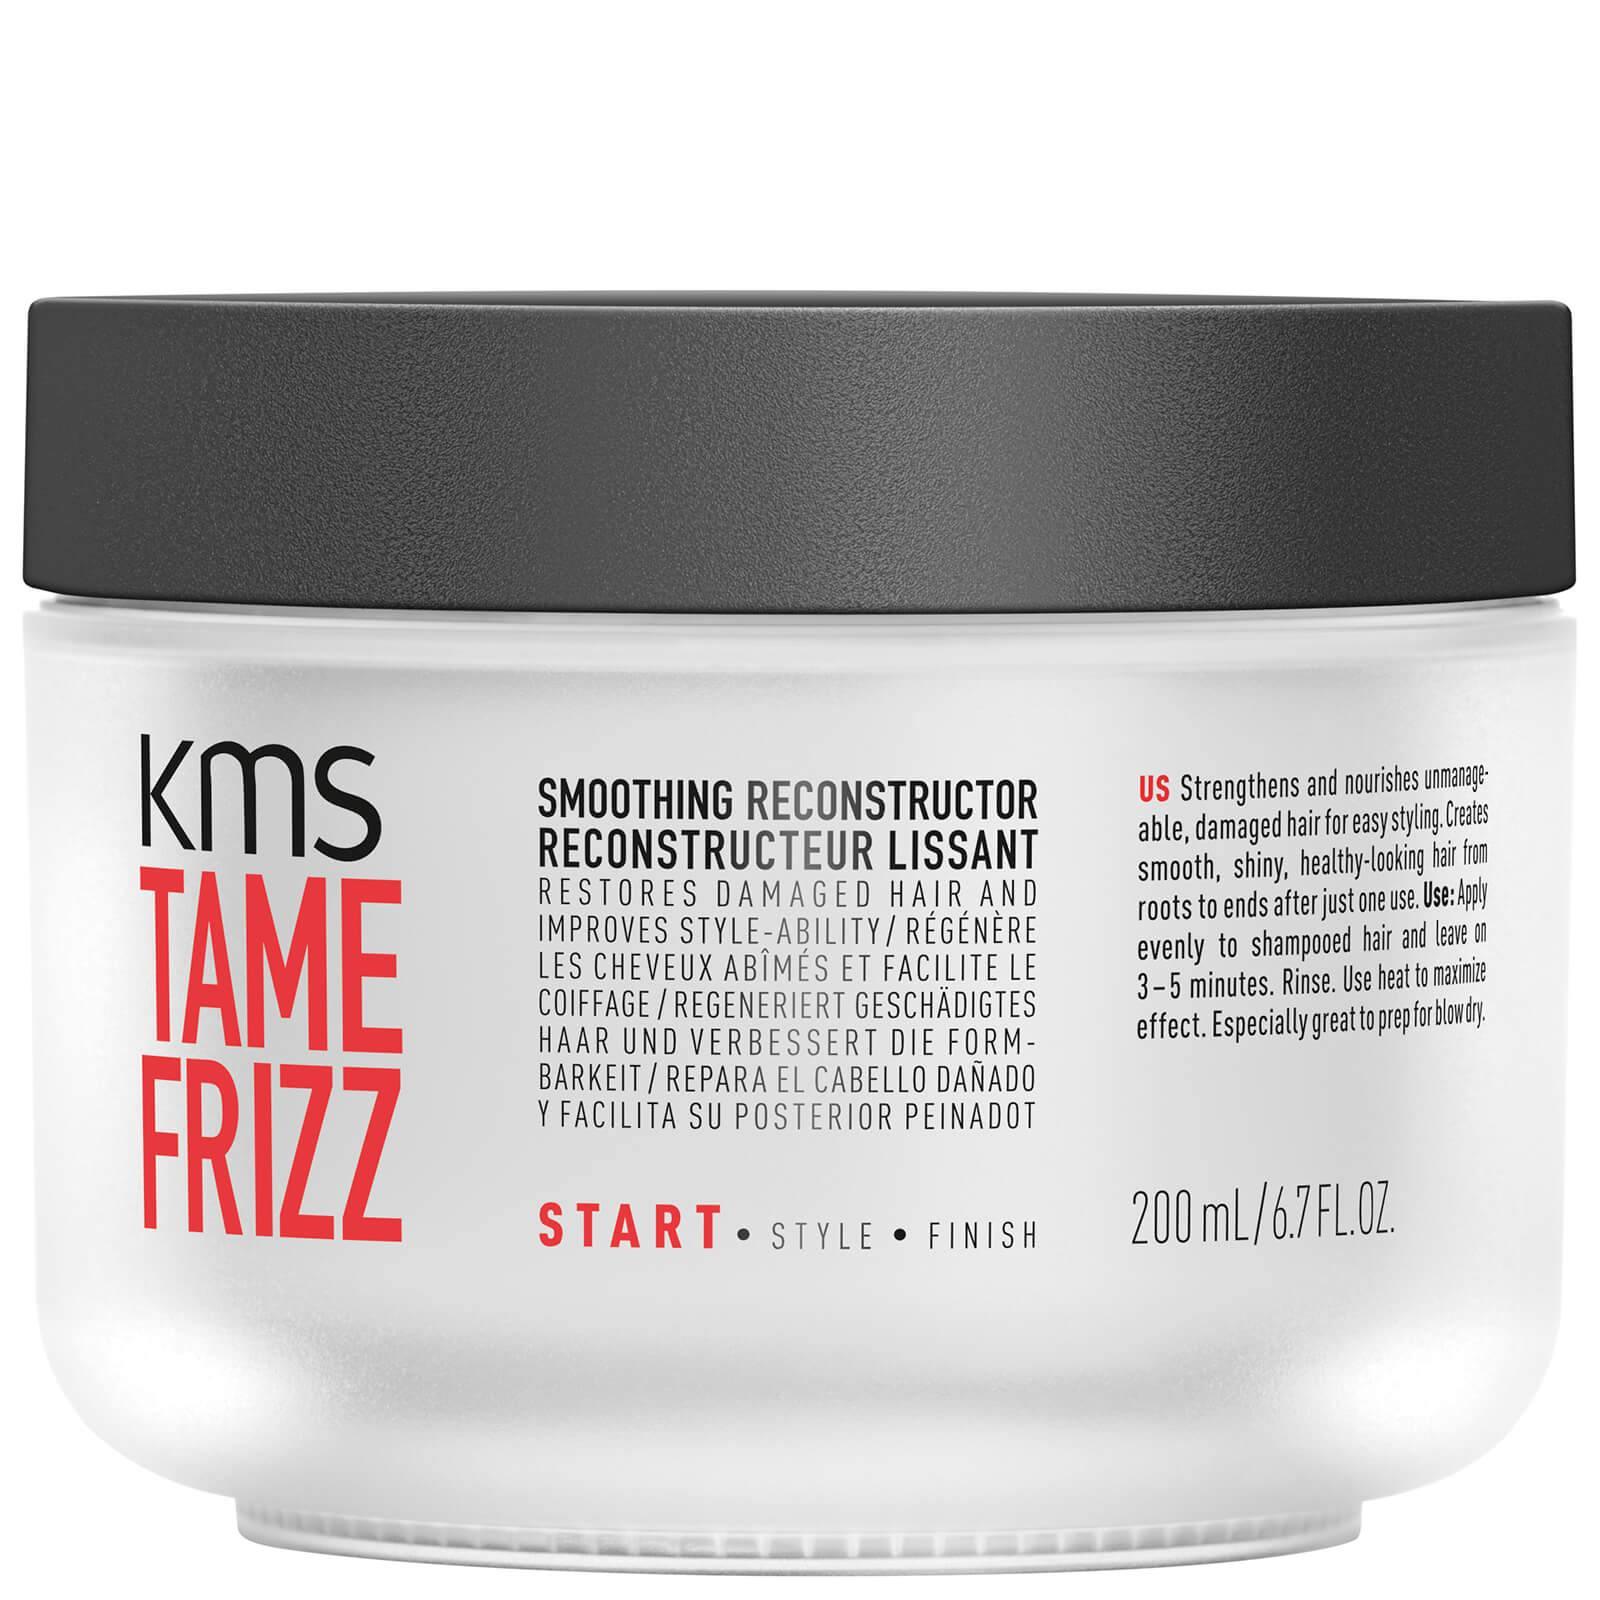 KMS Tame Frizz Smoothing Reconstructor 200ml - KMS